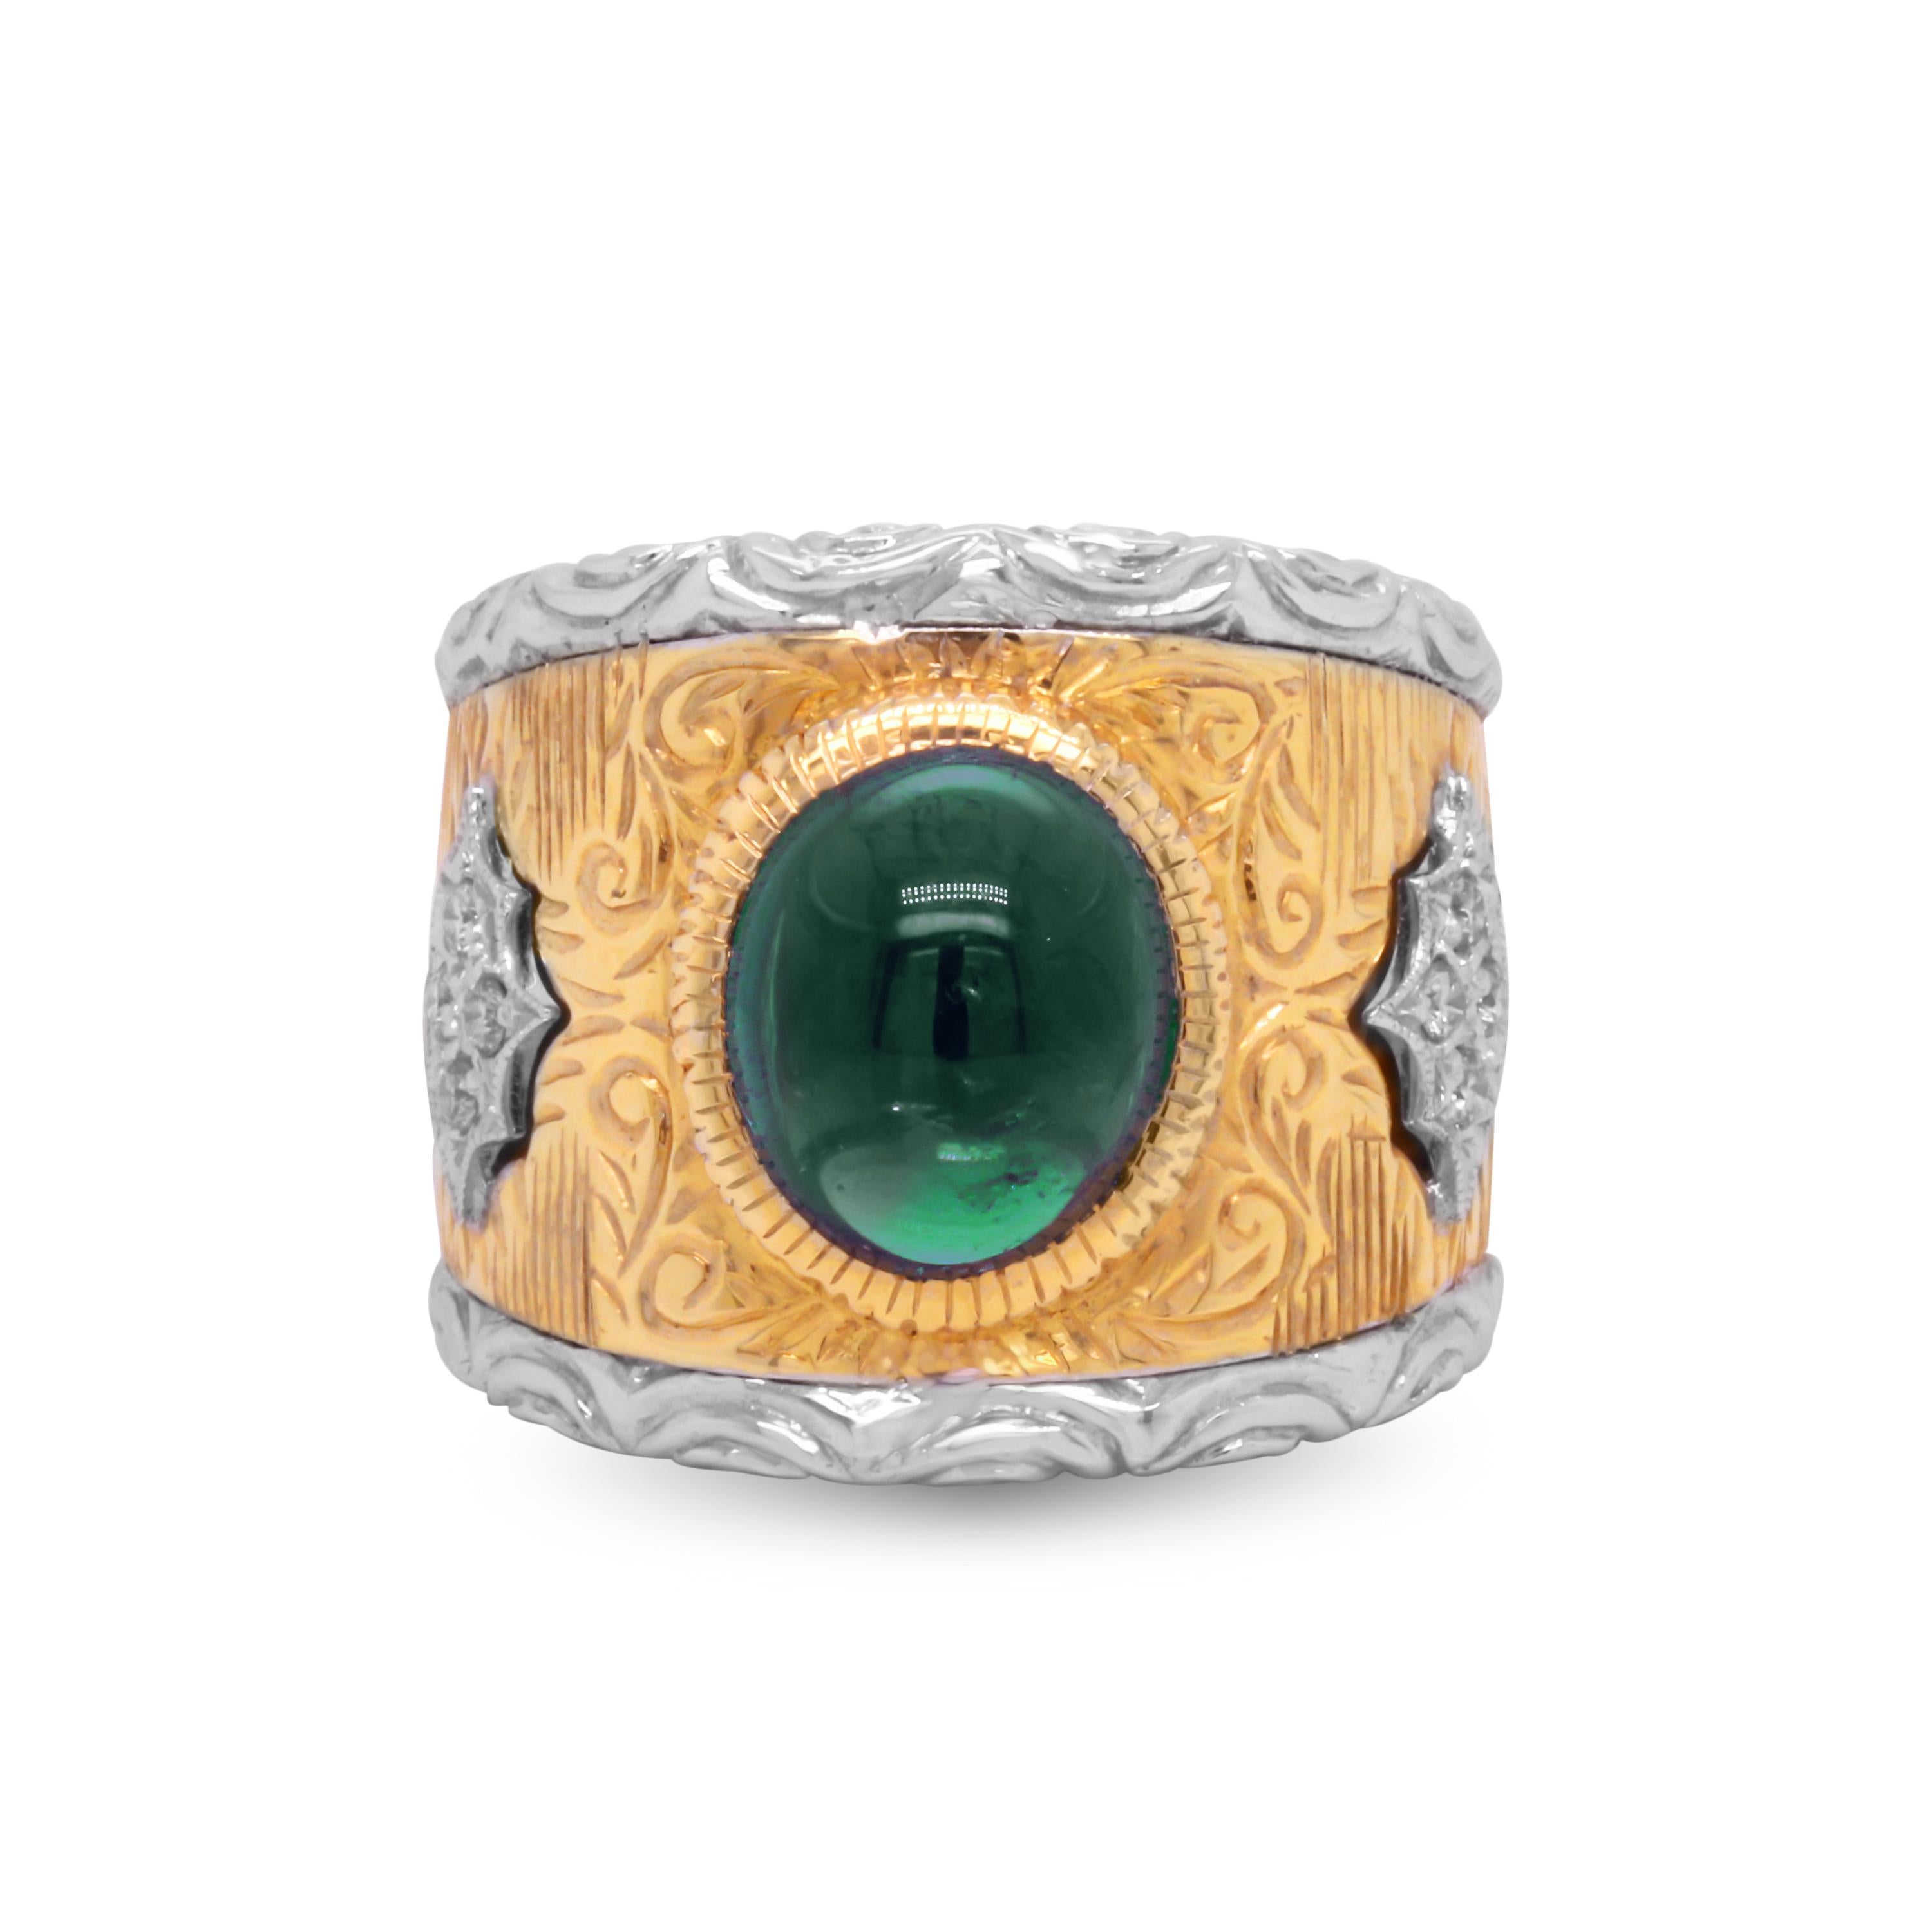 18K Brushed Yellow and White Two Tone Gold and Diamond Wide Band Ring with Oval, Cabochon Green Tourmaline center

This unique wide cocktail ring features an incredible design all throughout with yellow gold in the center along with white gold on